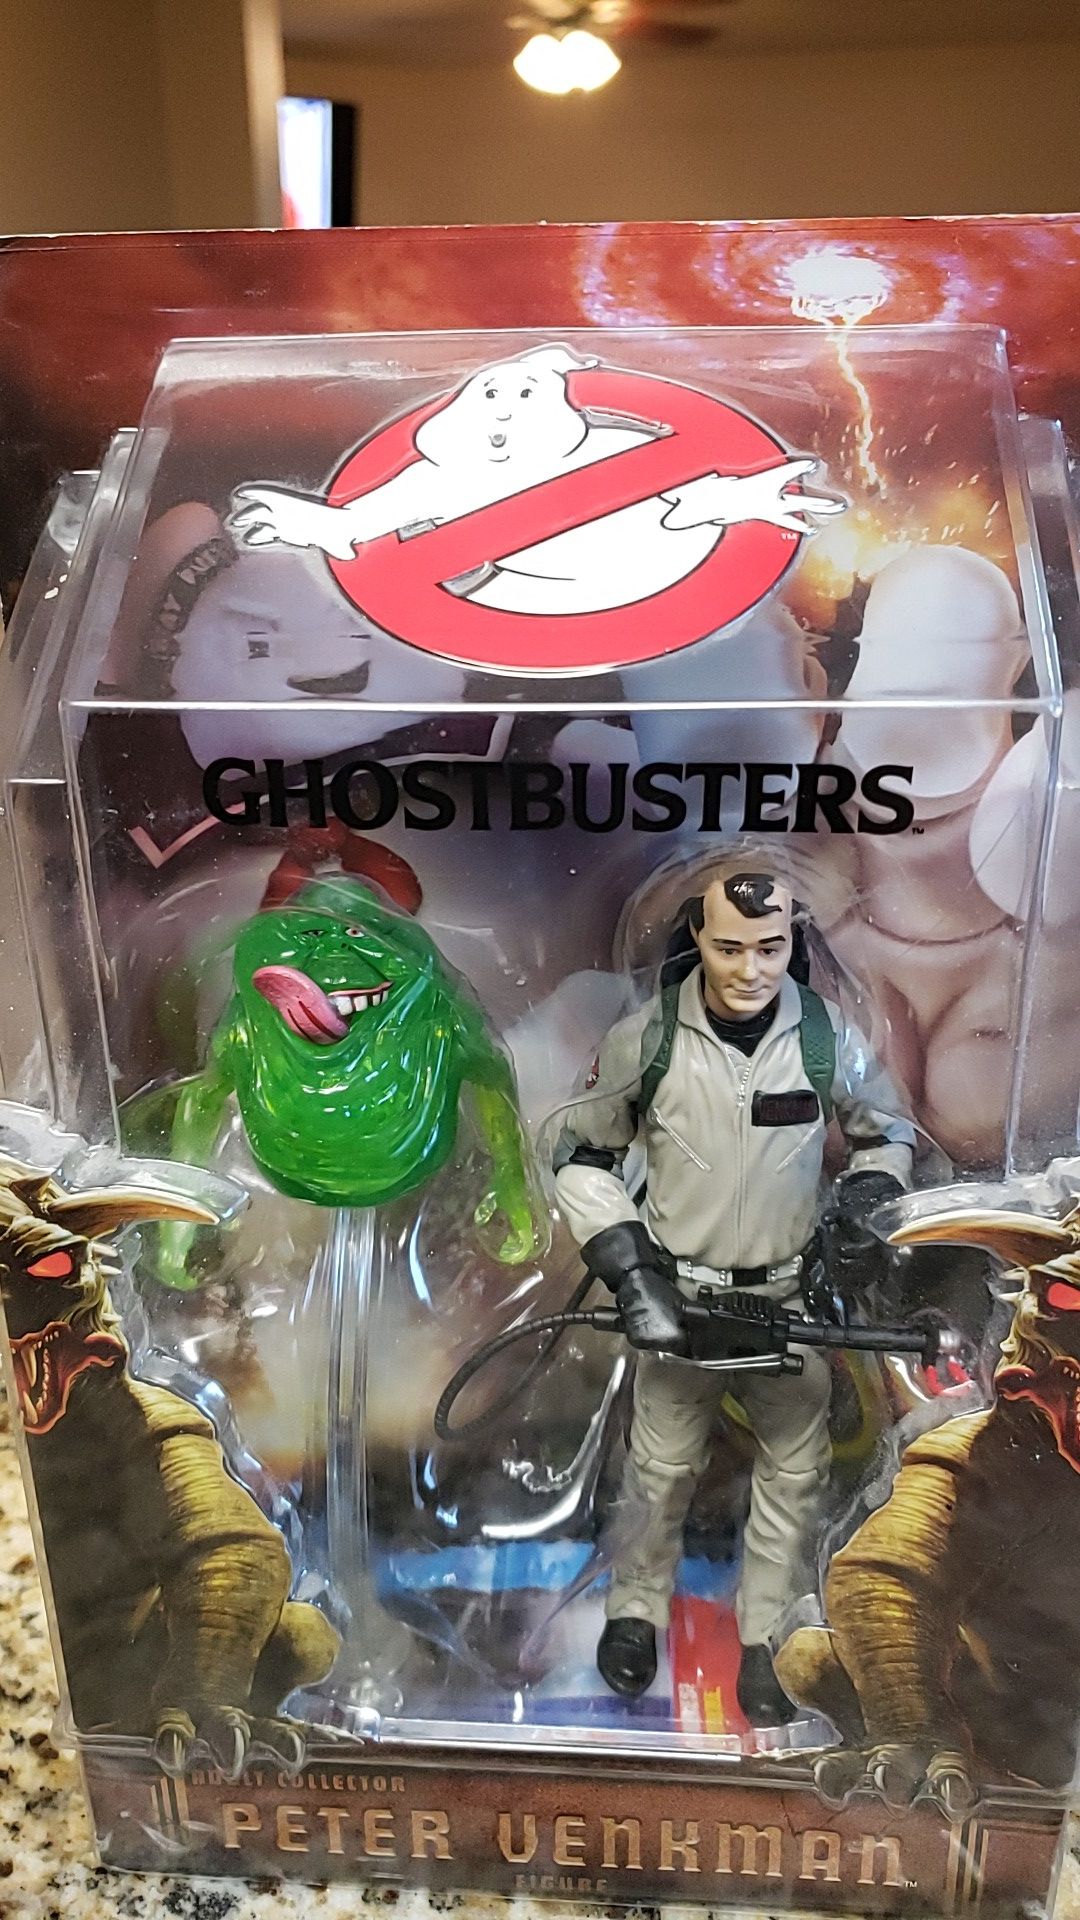 Ghostbusters Collectible Figurine